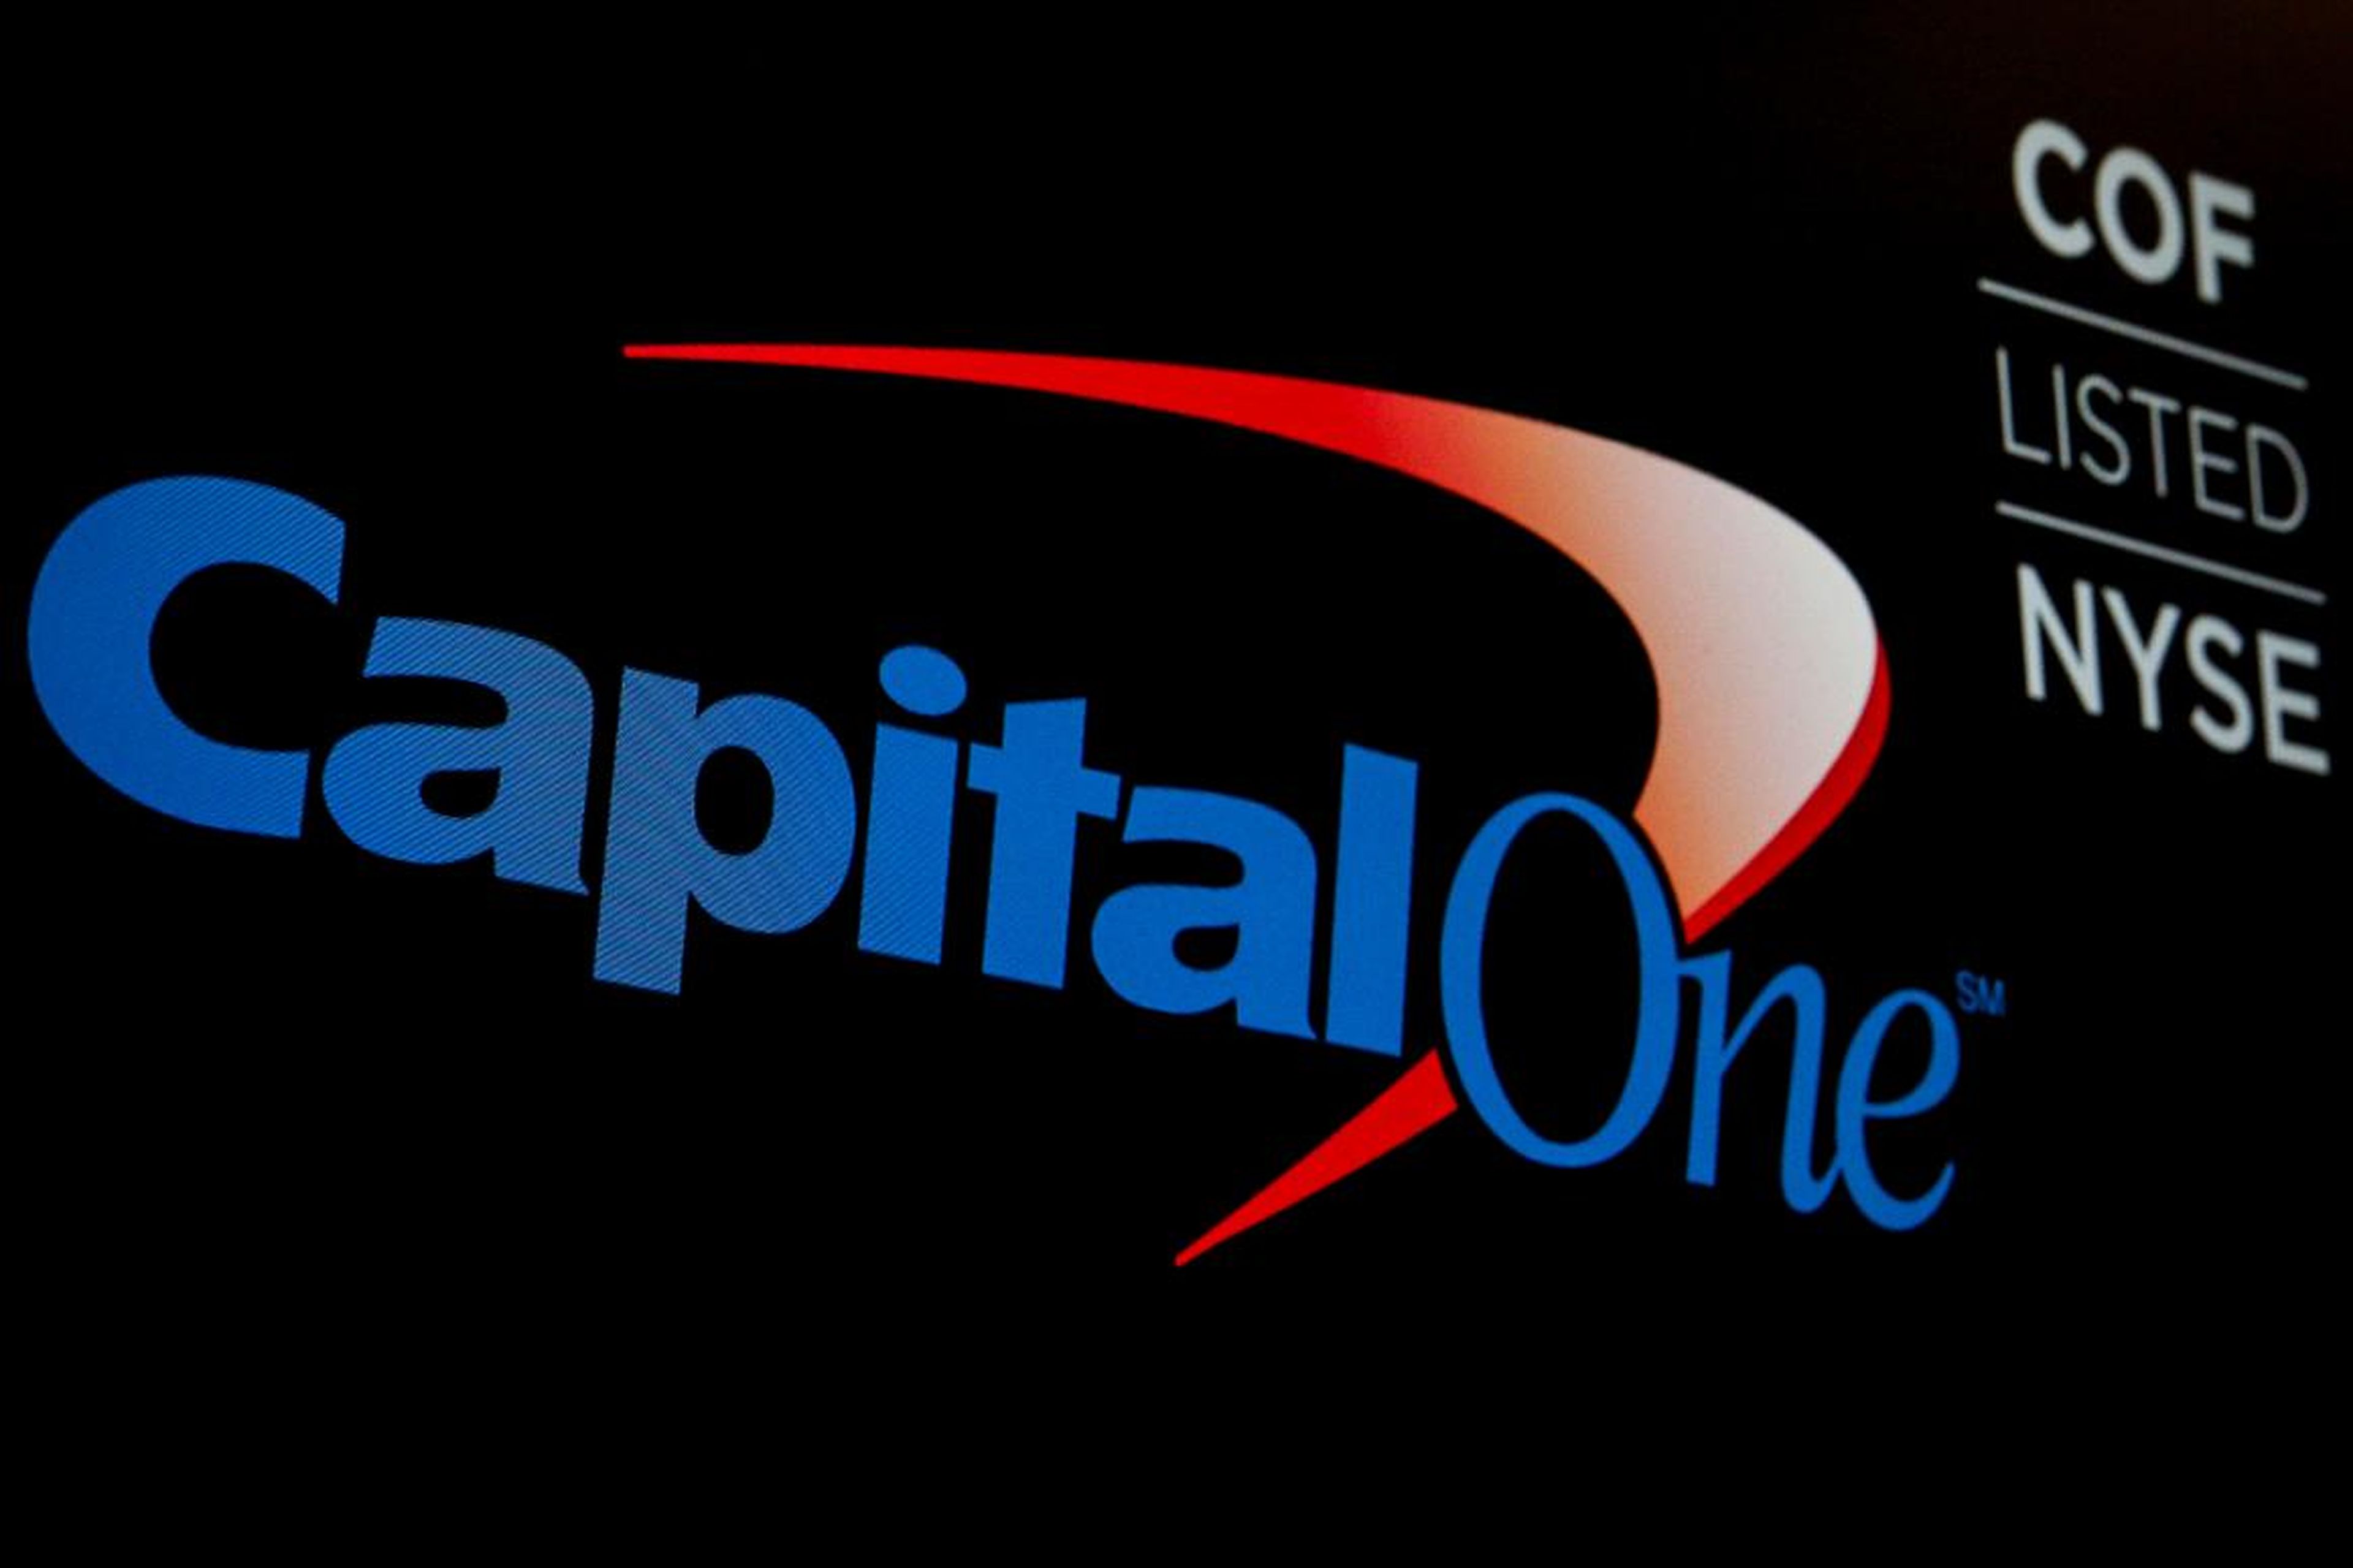 The logo and ticker for Capital One displayed on a screen on the floor of the New York Stock Exchange.